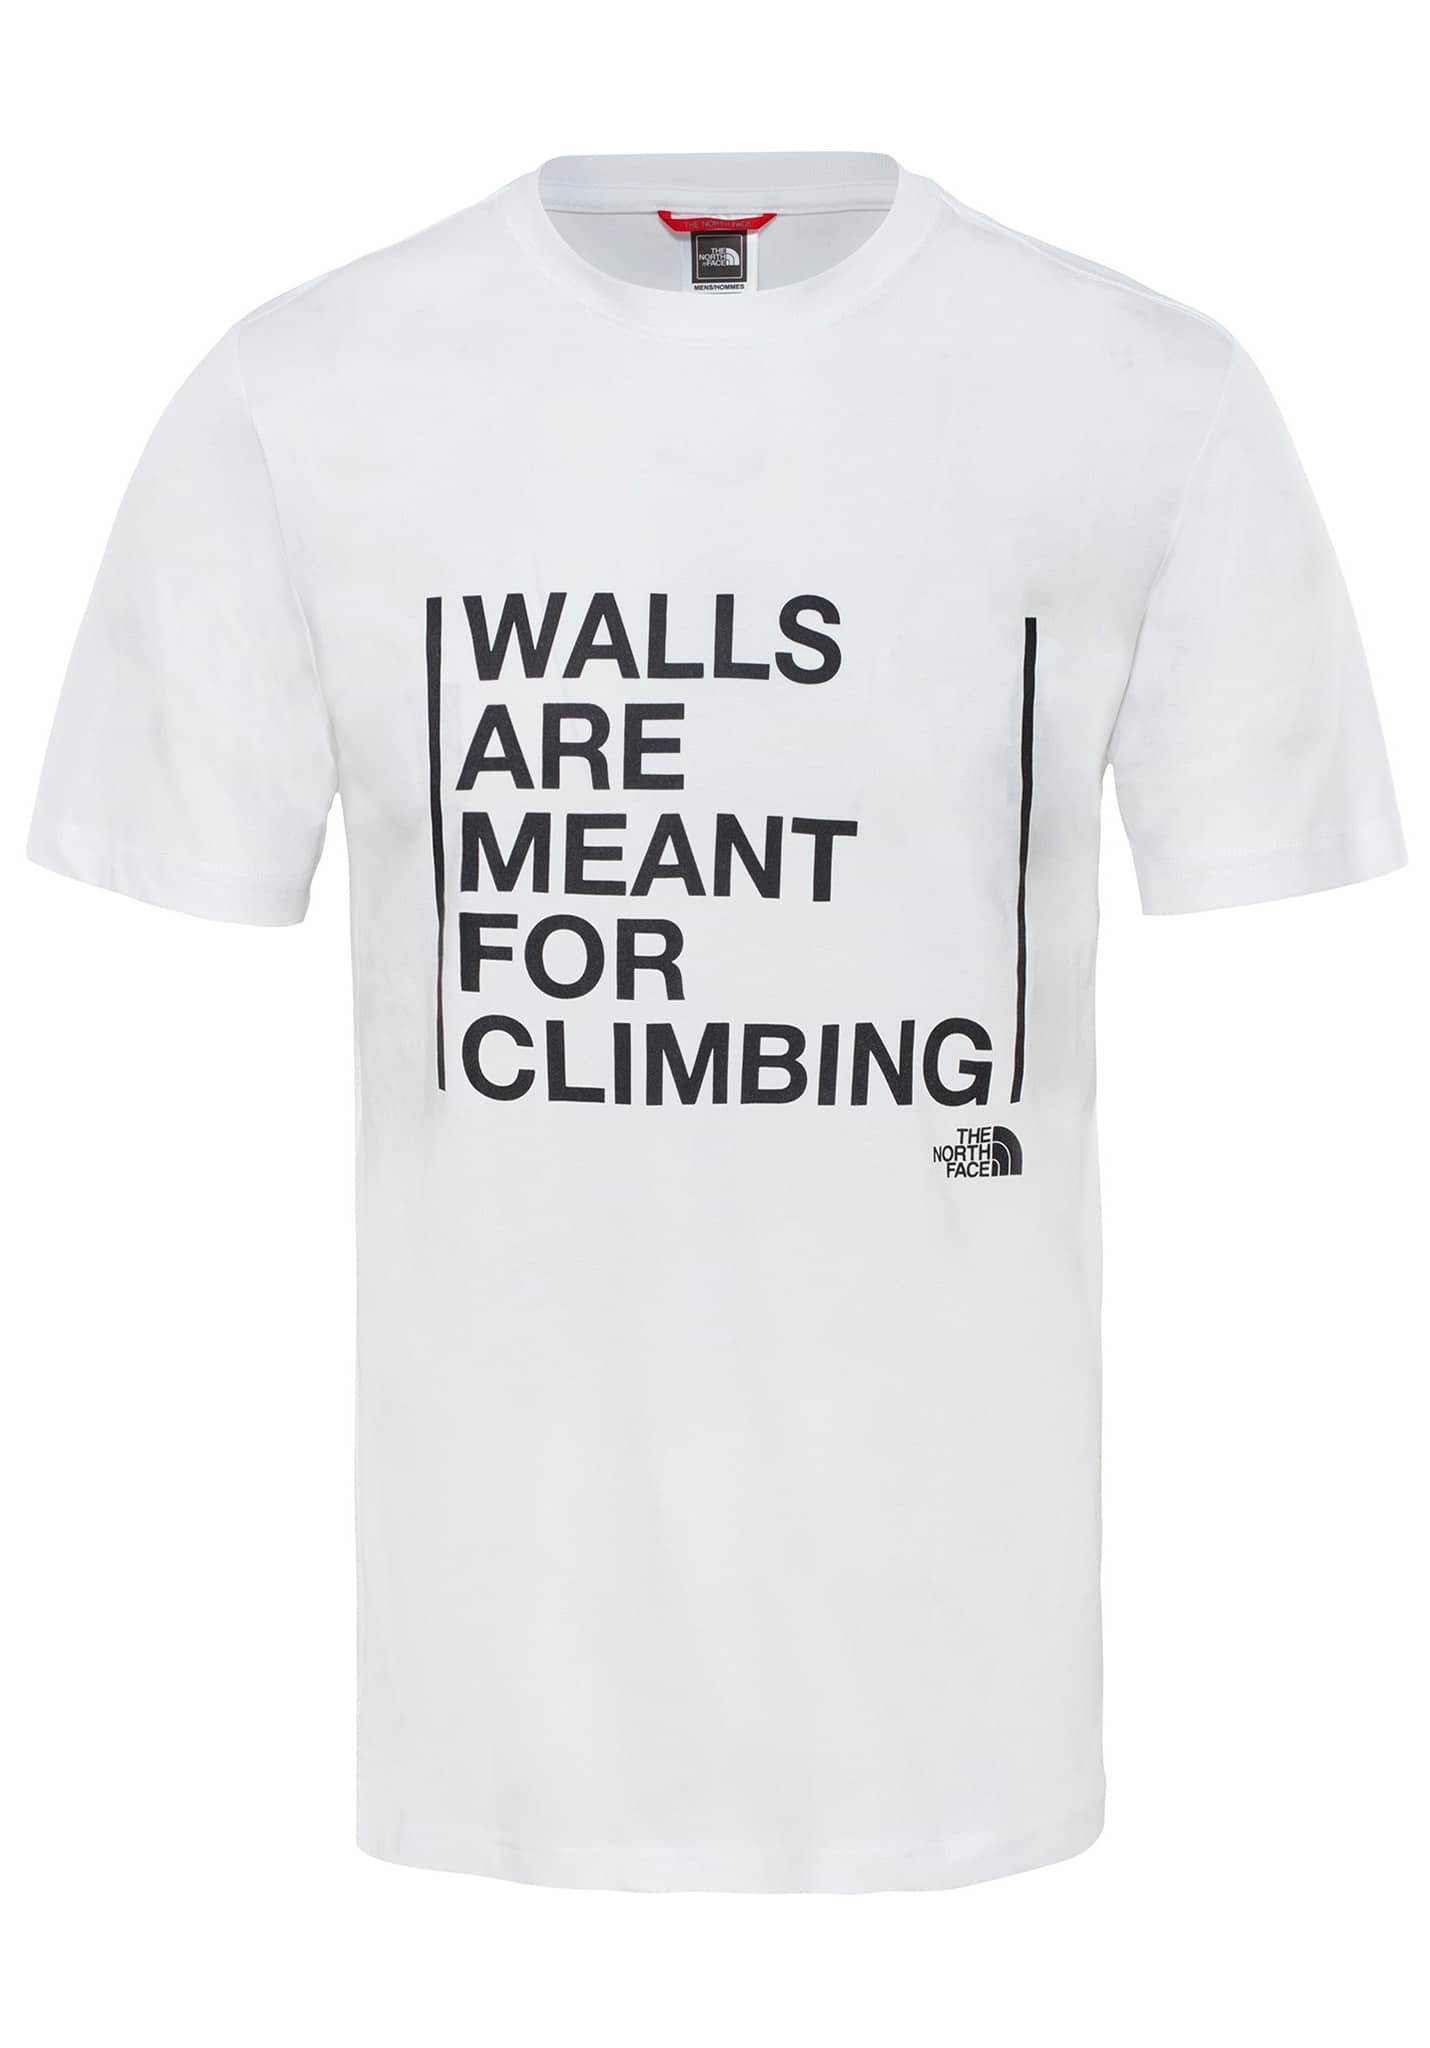 The North Face Walls Are For Climbing T-Shirt blau S